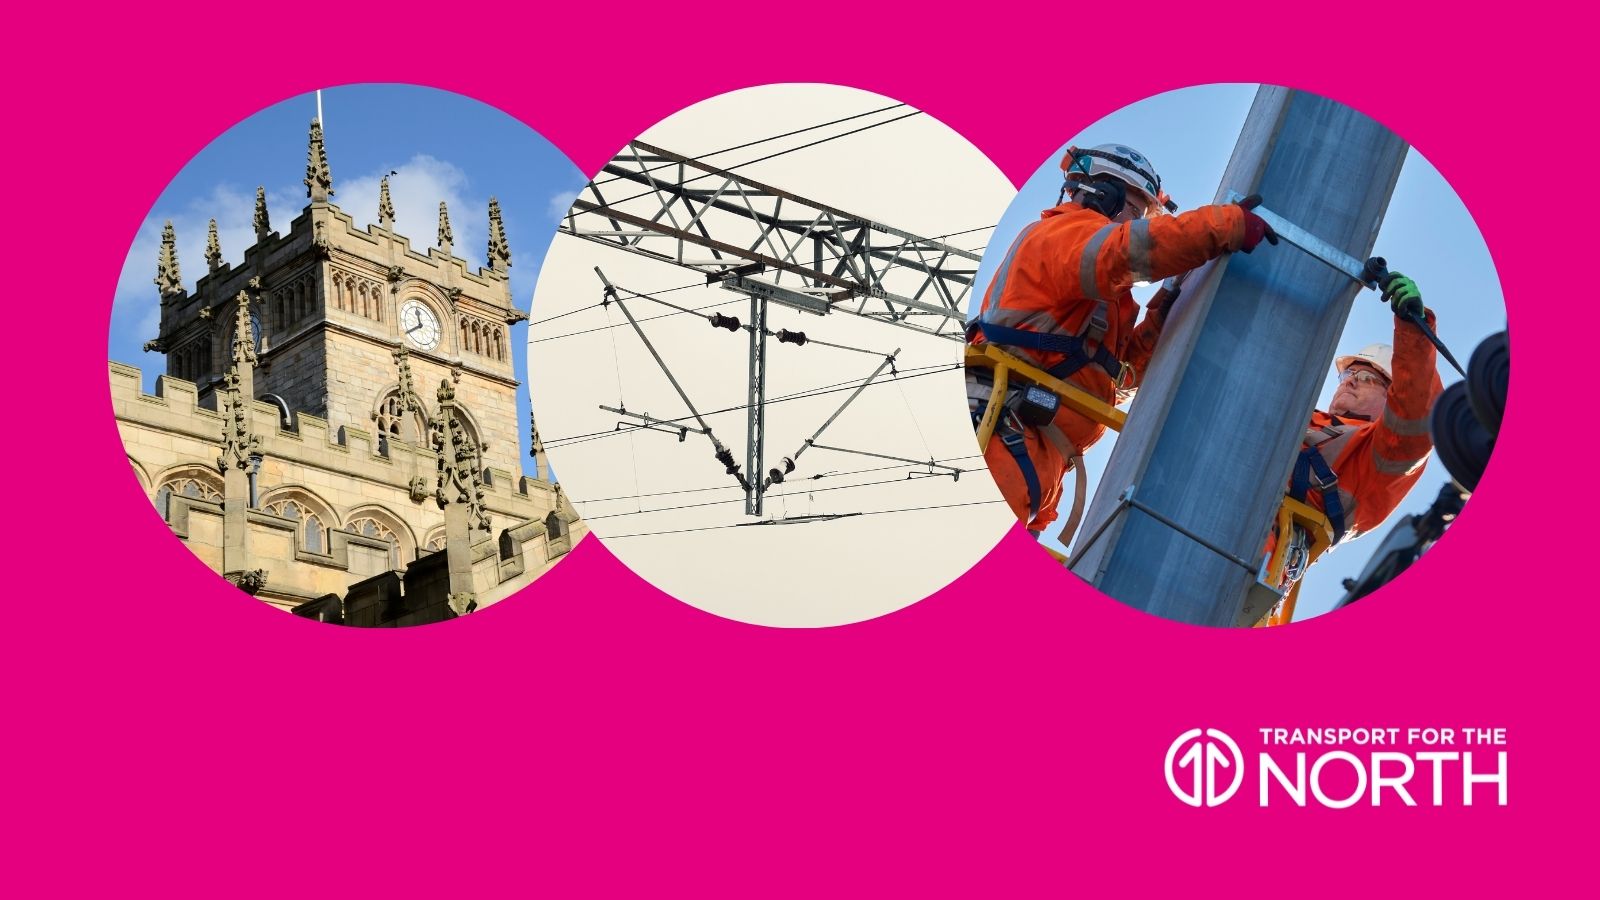 Wigan Church, Rail electrification lines and Network Rail workers